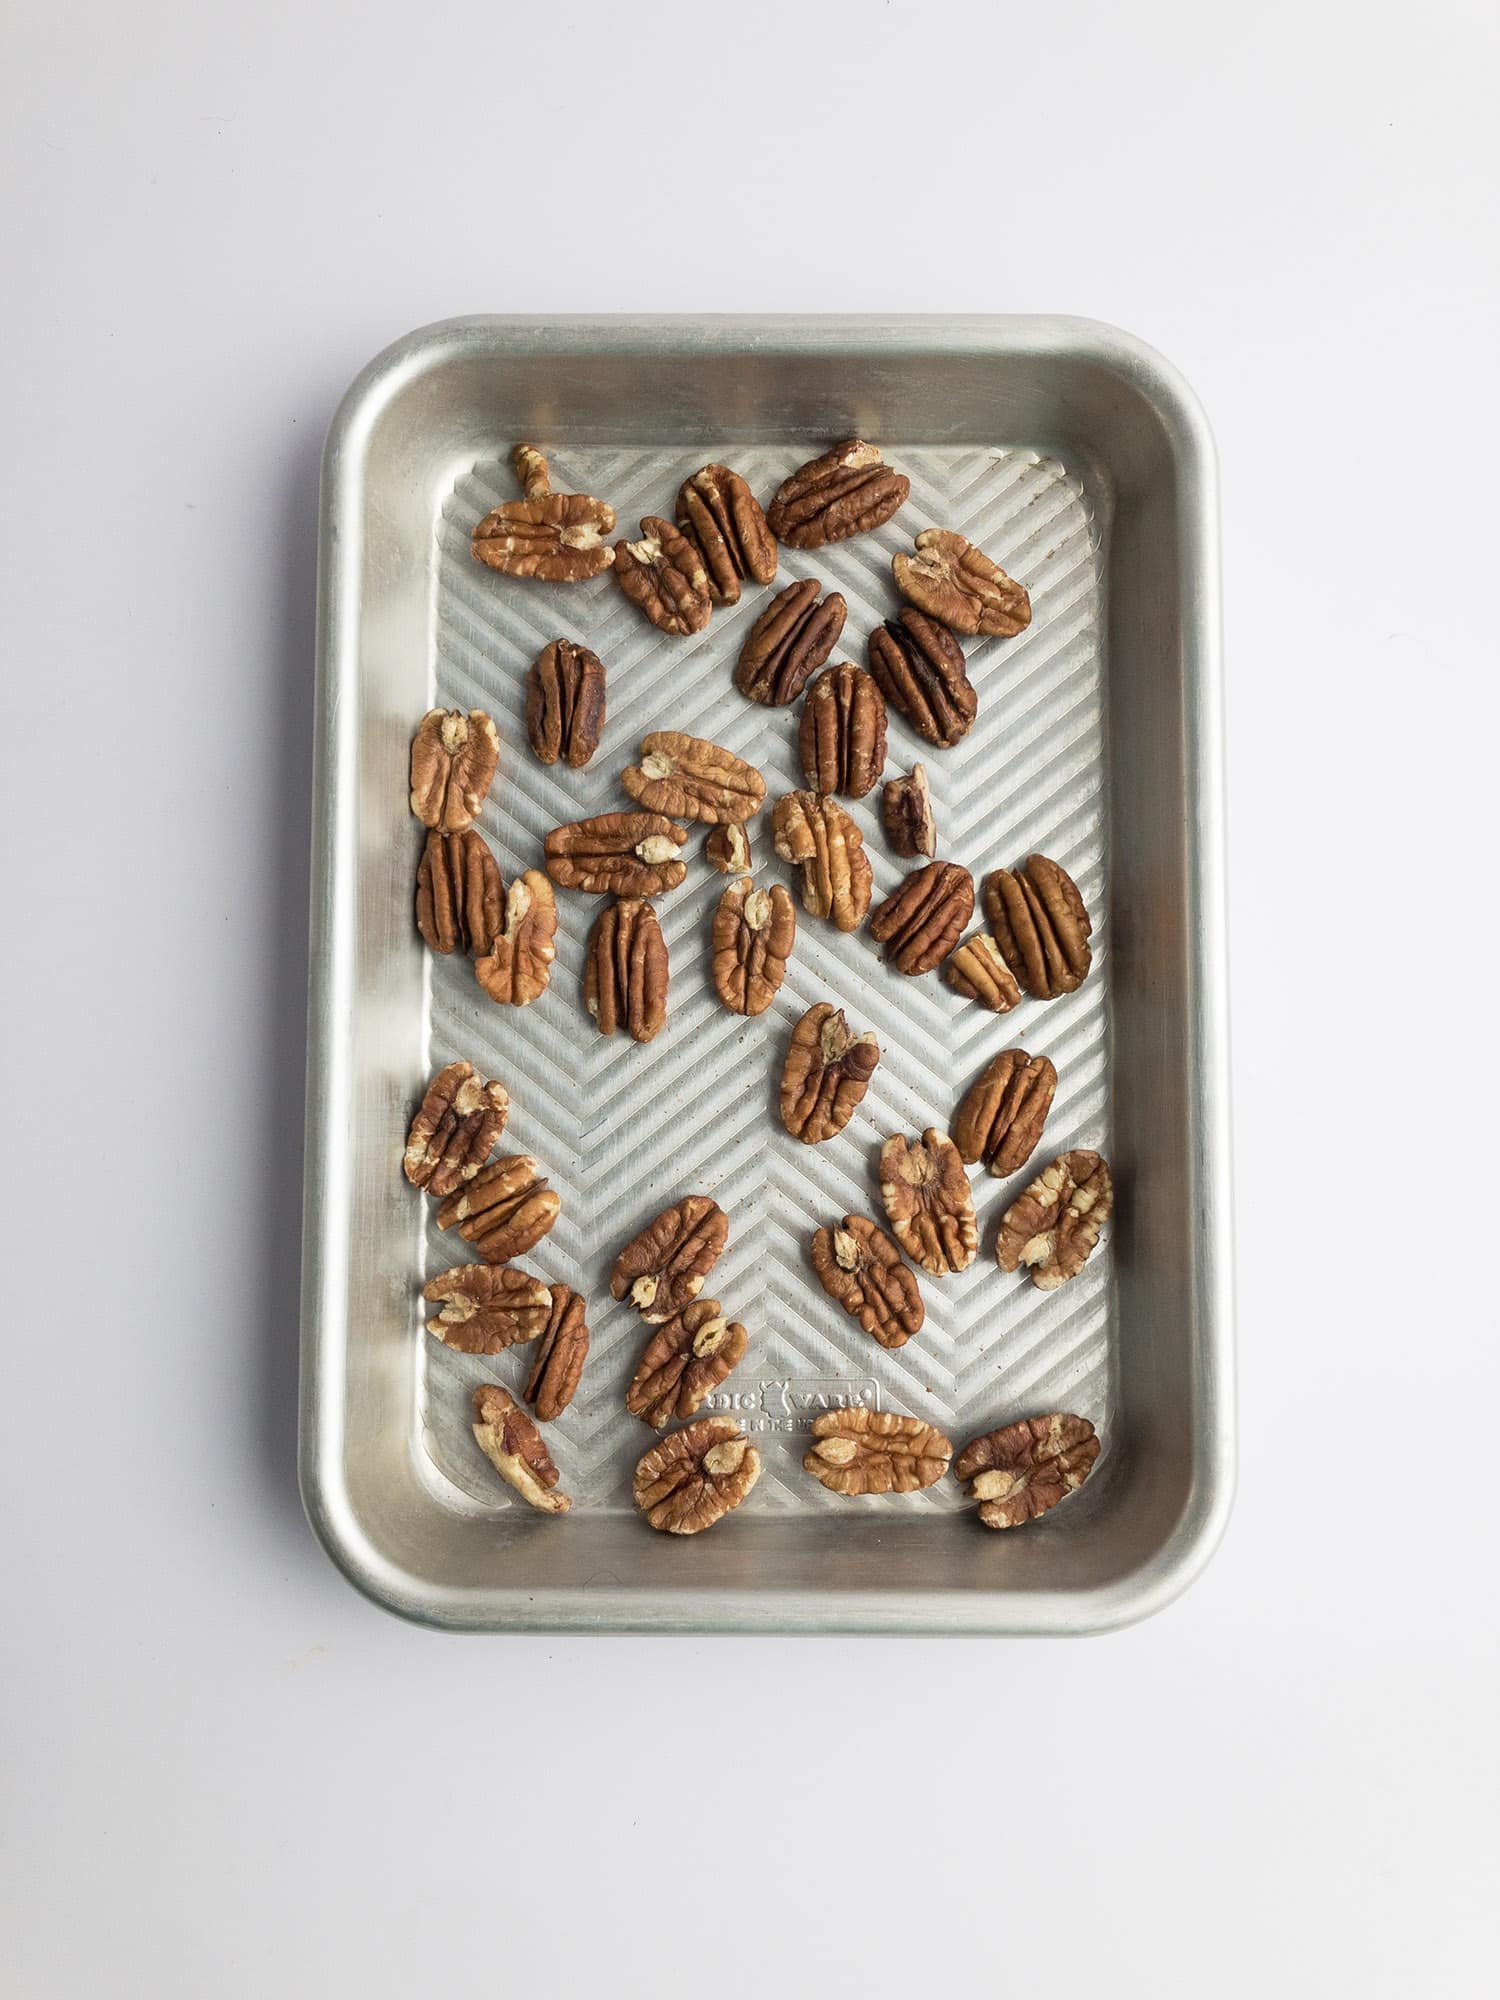 Top-down view of pecans on a baking sheet